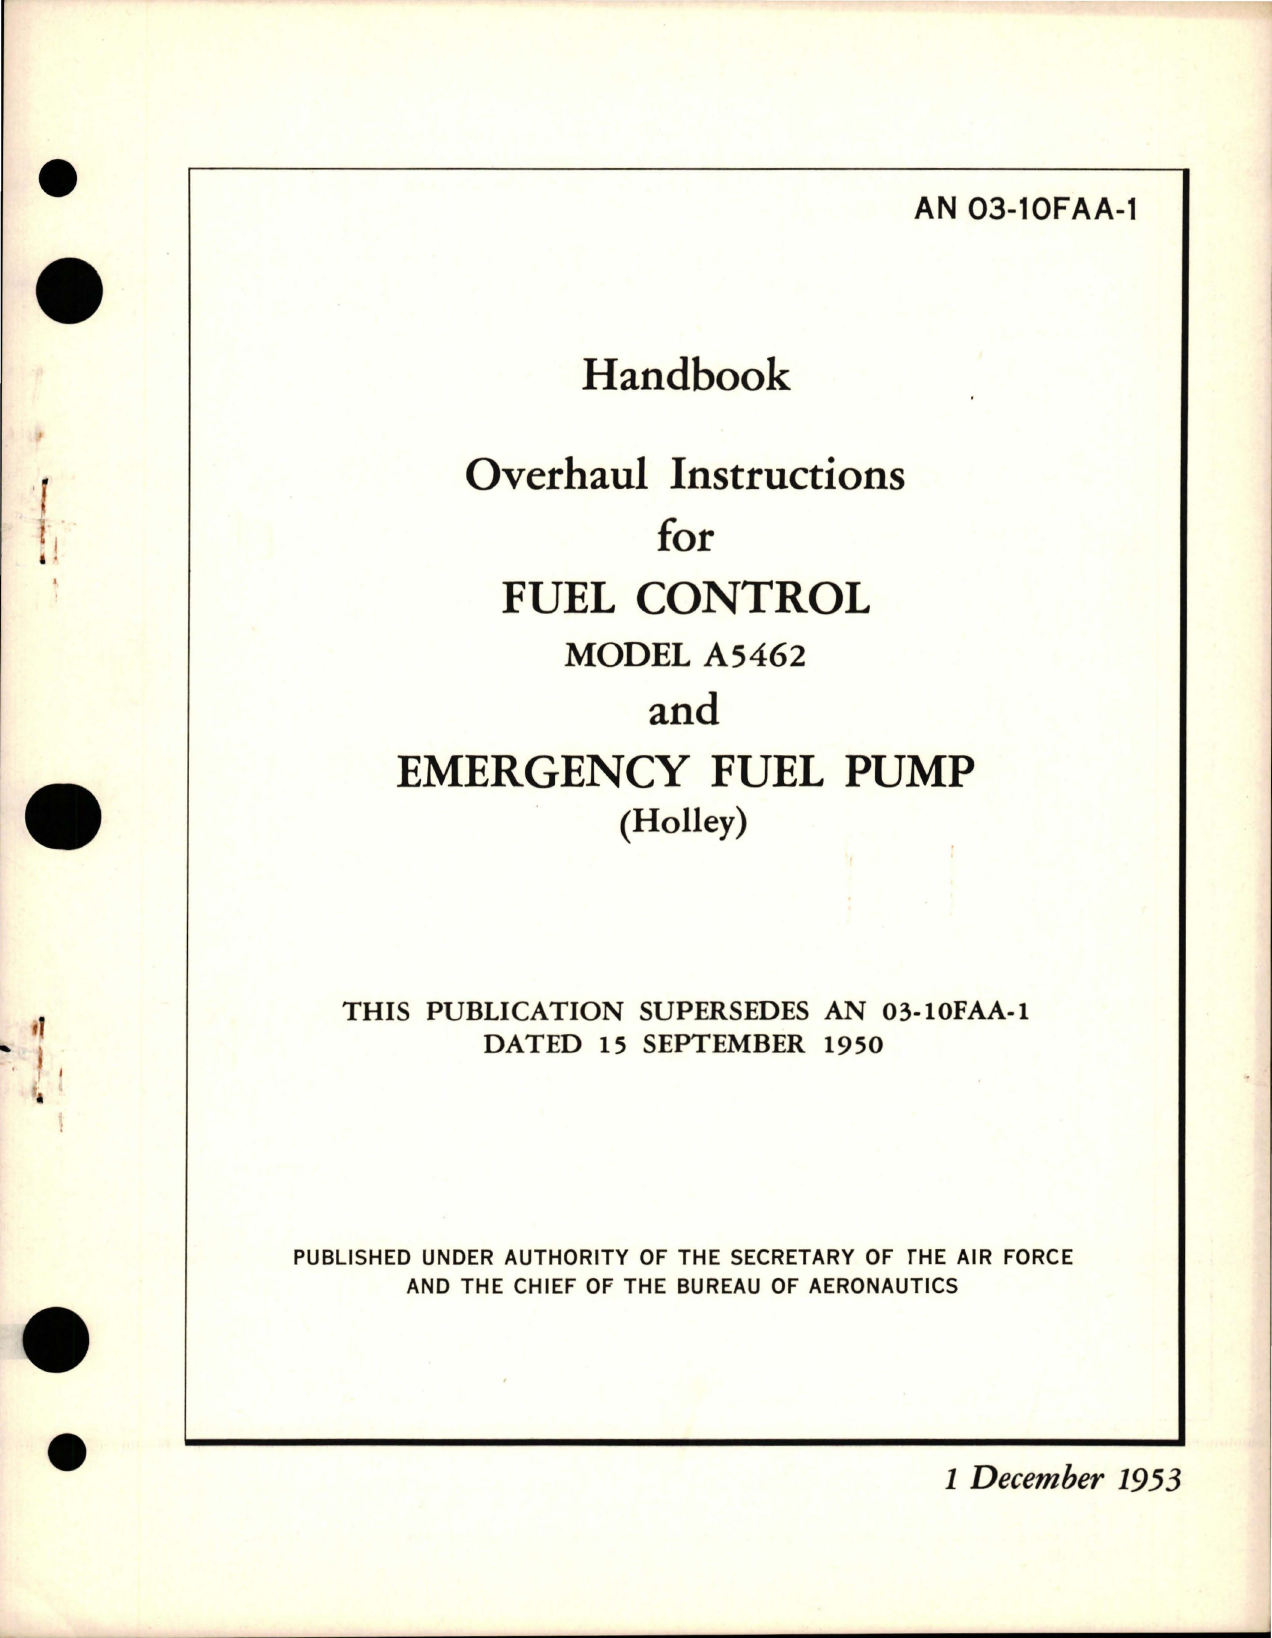 Sample page 1 from AirCorps Library document: Overhaul Instructions for Fuel Control - Model A5462 and Emergency Fuel Pump